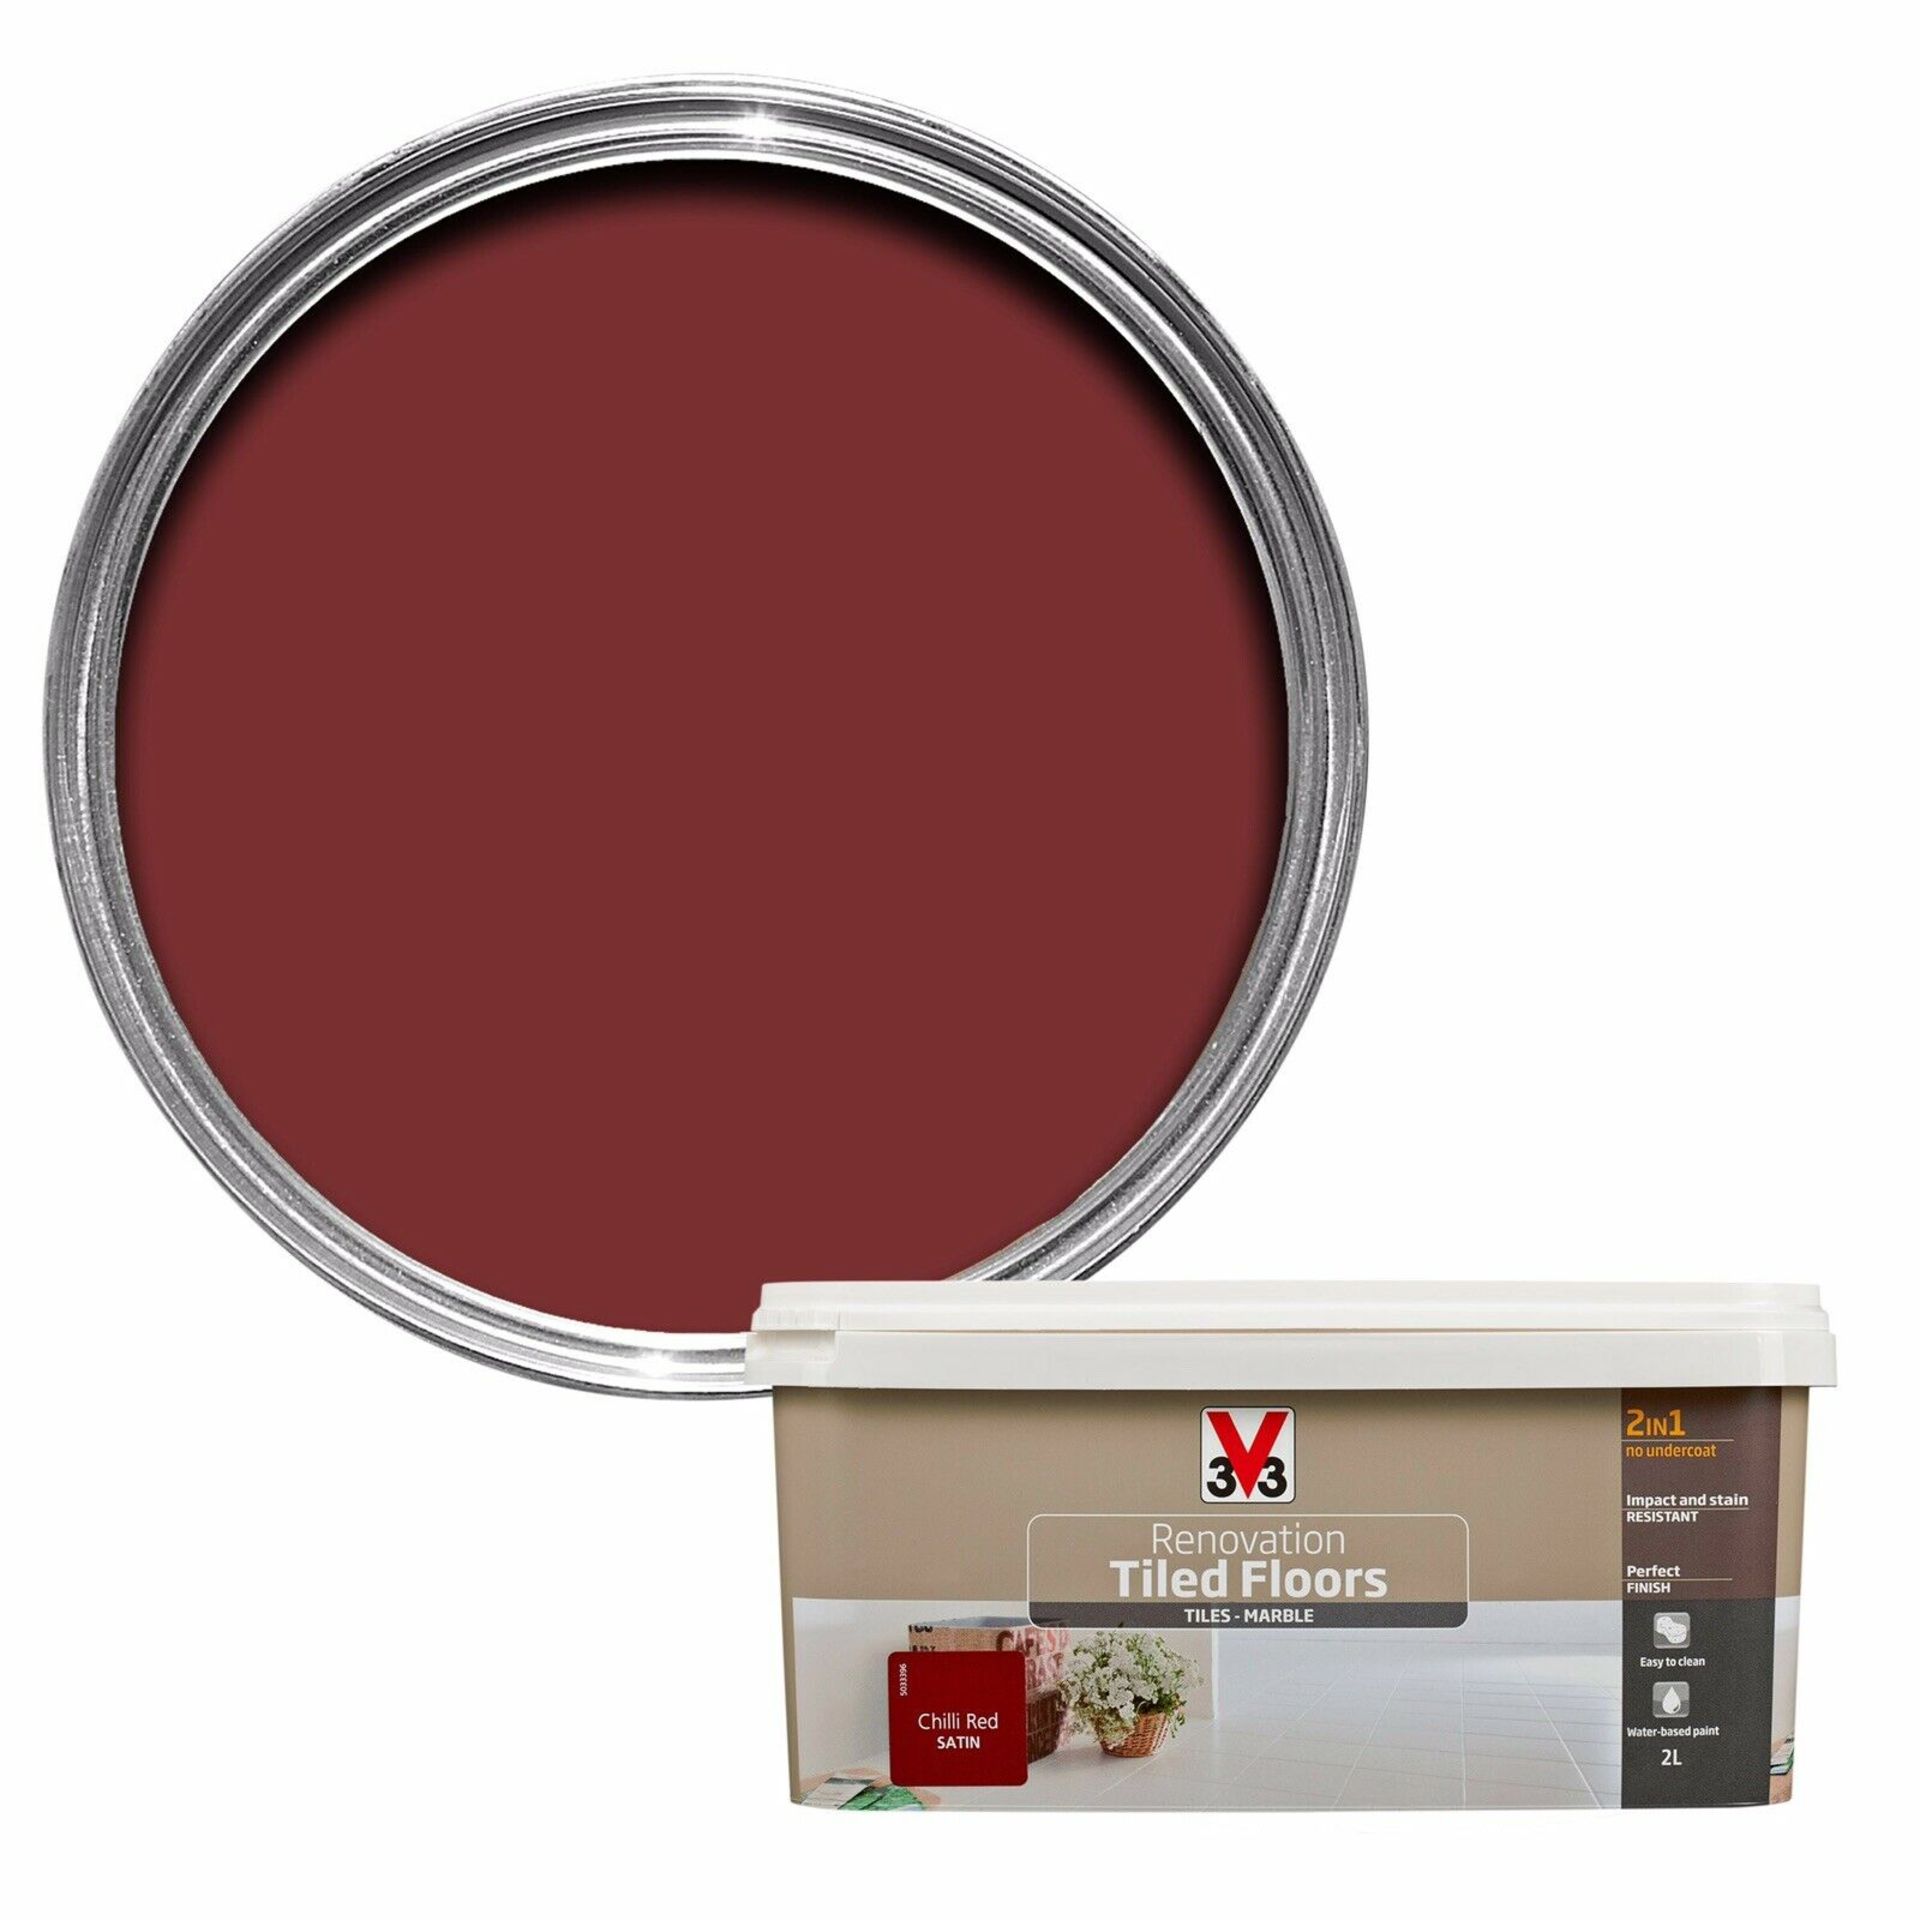 Brand New 8 Litres x V33 Red Chilli Renovation Tiled Floors 2L Paint. 2 in 1 - No undercoat required